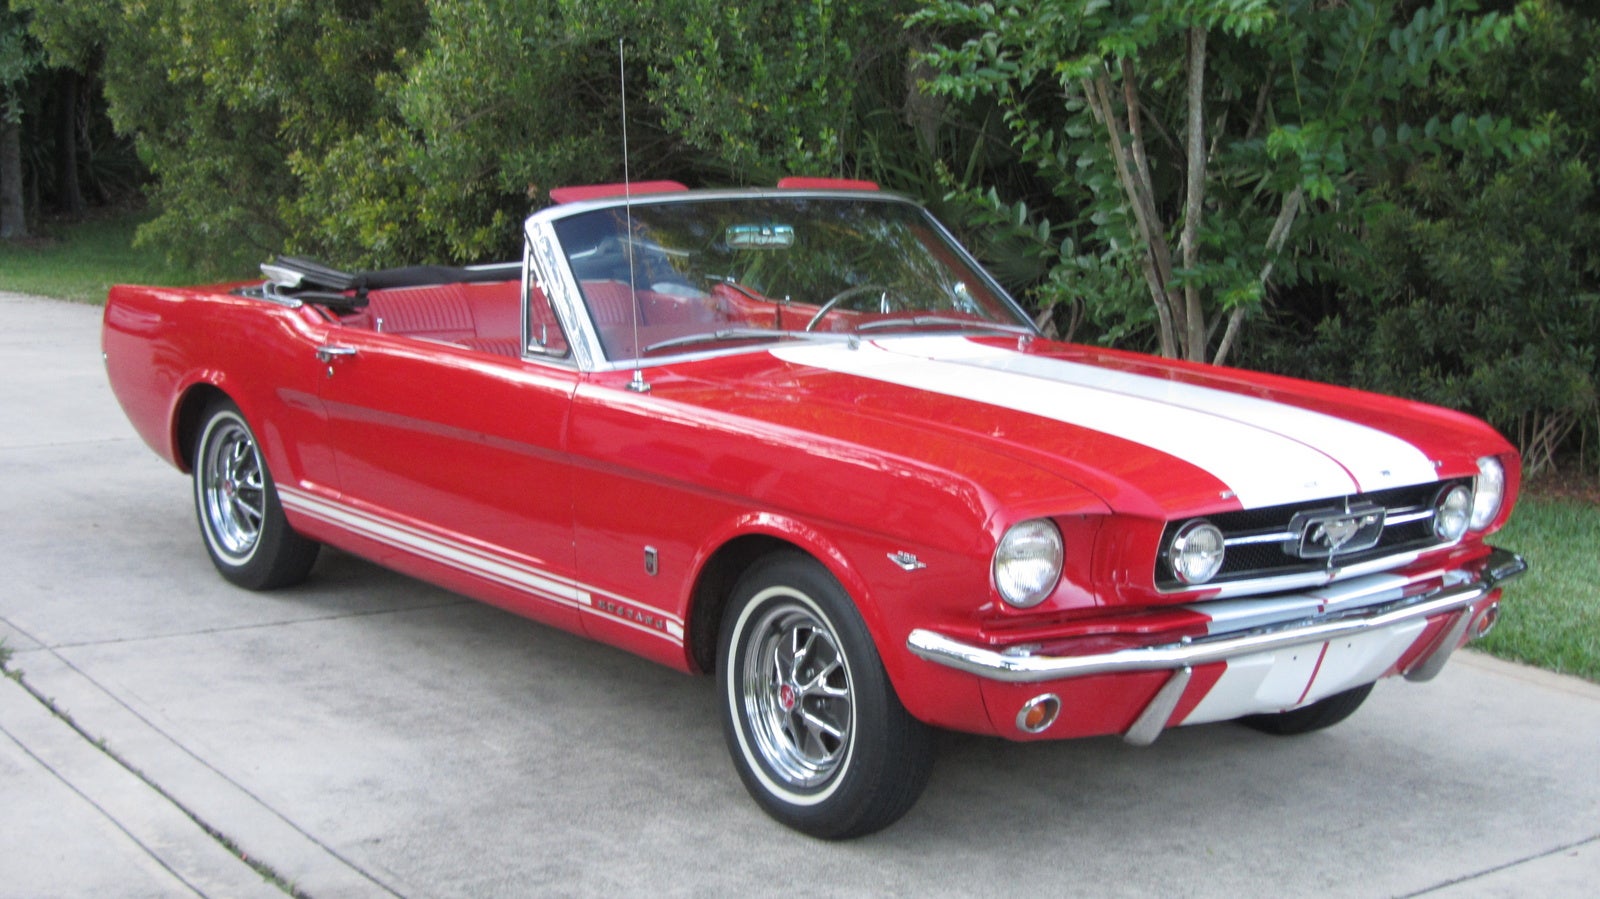 Ford Mustang http://static.cargurus.com/images/site/2013/05/28/18/17/1965_ford_mustang_standard_convertible-pic-8553472973824025712.jpeg